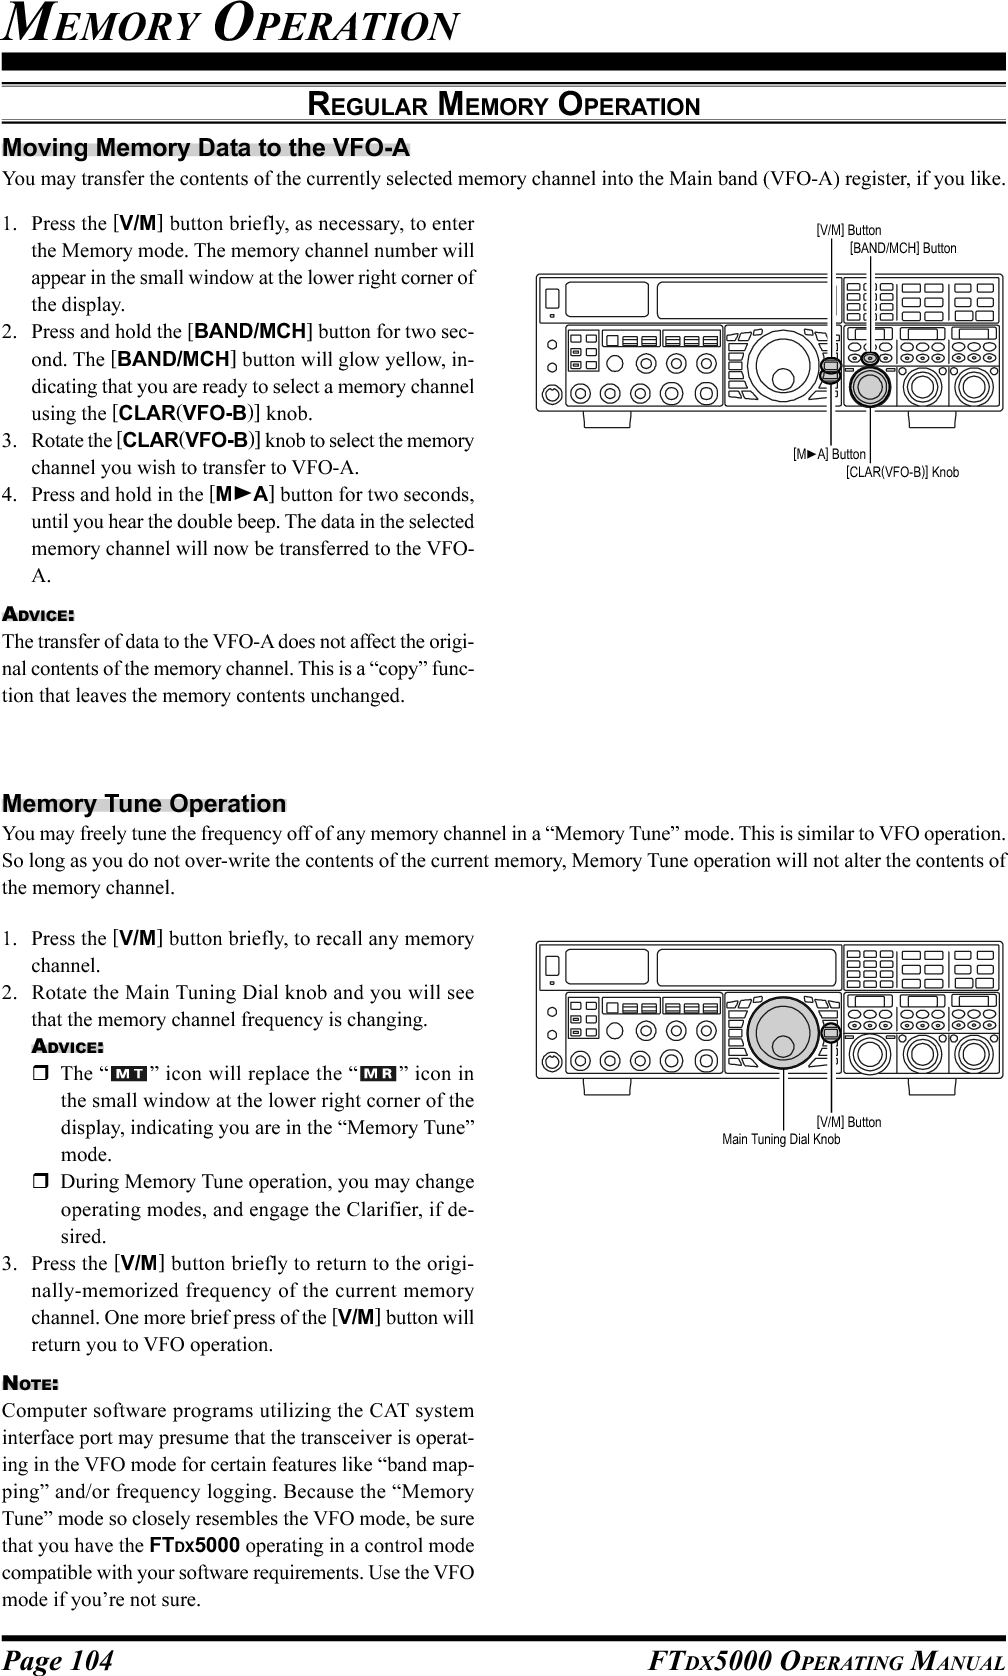 Page 104 FTDX5000 OPERATING MANUALMEMORY OPERATIONREGULAR MEMORY OPERATIONMoving Memory Data to the VFO-AYou may transfer the contents of the currently selected memory channel into the Main band (VFO-A) register, if you like.1. Press the [V/M] button briefly, as necessary, to enterthe Memory mode. The memory channel number willappear in the small window at the lower right corner ofthe display.2. Press and hold the [BAND/MCH] button for two sec-ond. The [BAND/MCH] button will glow yellow, in-dicating that you are ready to select a memory channelusing the [CLAR(VFO-B)] knob.3. Rotate the [CLAR(VFO-B)] knob to select the memorychannel you wish to transfer to VFO-A.4. Press and hold in the [MA] button for two seconds,until you hear the double beep. The data in the selectedmemory channel will now be transferred to the VFO-A.ADVICE:The transfer of data to the VFO-A does not affect the origi-nal contents of the memory channel. This is a “copy” func-tion that leaves the memory contents unchanged.1. Press the [V/M] button briefly, to recall any memorychannel.2. Rotate the Main Tuning Dial knob and you will seethat the memory channel frequency is changing.ADVICE:The “ ” icon will replace the “ ” icon inthe small window at the lower right corner of thedisplay, indicating you are in the “Memory Tune”mode.During Memory Tune operation, you may changeoperating modes, and engage the Clarifier, if de-sired.3. Press the [V/M] button briefly to return to the origi-nally-memorized frequency of the current memorychannel. One more brief press of the [V/M] button willreturn you to VFO operation.NOTE:Computer software programs utilizing the CAT systeminterface port may presume that the transceiver is operat-ing in the VFO mode for certain features like “band map-ping” and/or frequency logging. Because the “MemoryTune” mode so closely resembles the VFO mode, be surethat you have the FTDX5000 operating in a control modecompatible with your software requirements. Use the VFOmode if you’re not sure.Memory Tune OperationYou may freely tune the frequency off of any memory channel in a “Memory Tune” mode. This is similar to VFO operation.So long as you do not over-write the contents of the current memory, Memory Tune operation will not alter the contents ofthe memory channel.[CLAR(VFO-B)] Knob[MA] Button[BAND/MCH] Button[V/M] Button[V/M] ButtonMain Tuning Dial Knob